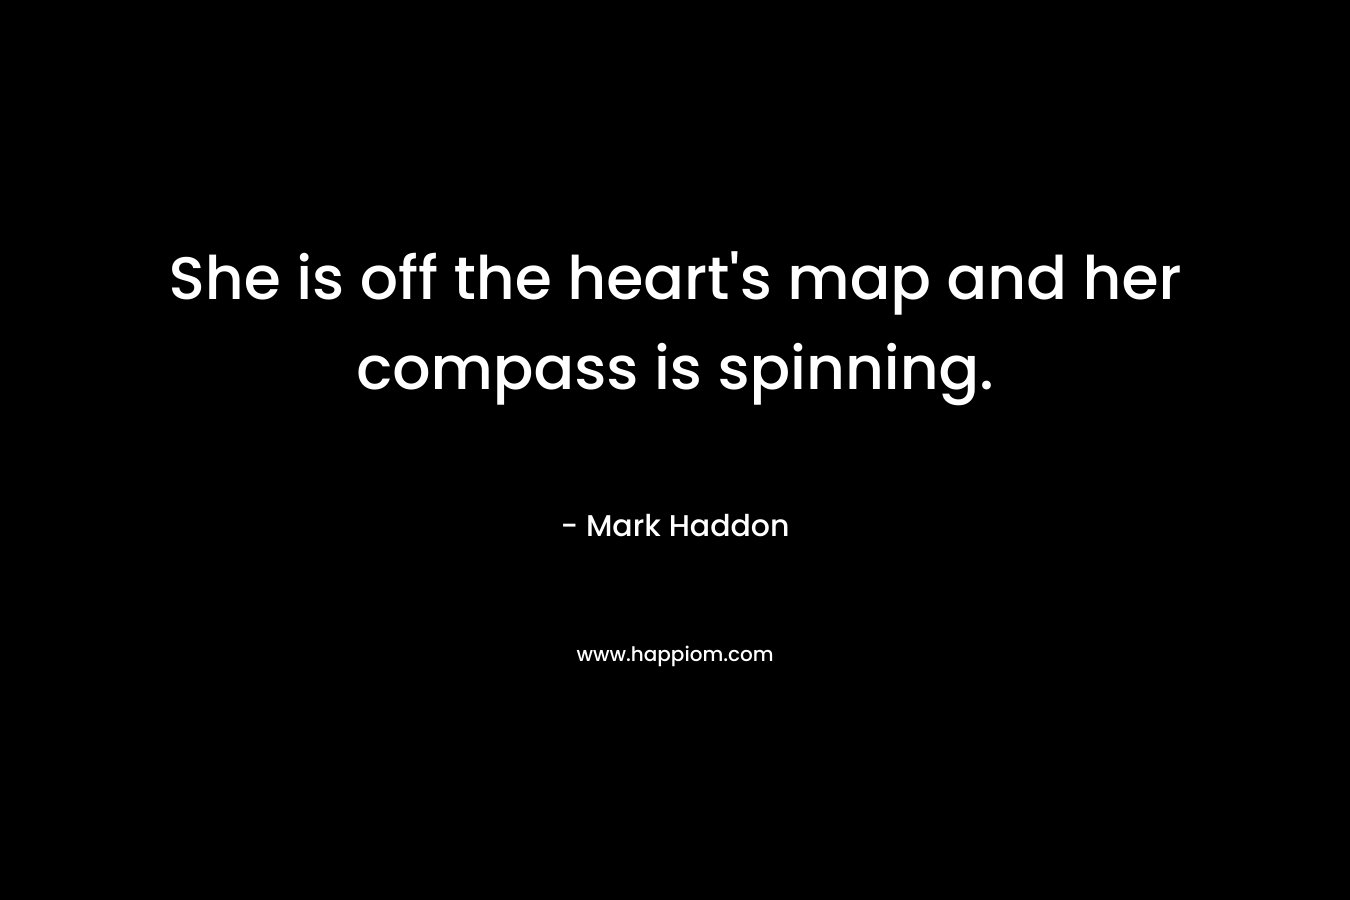 She is off the heart's map and her compass is spinning.